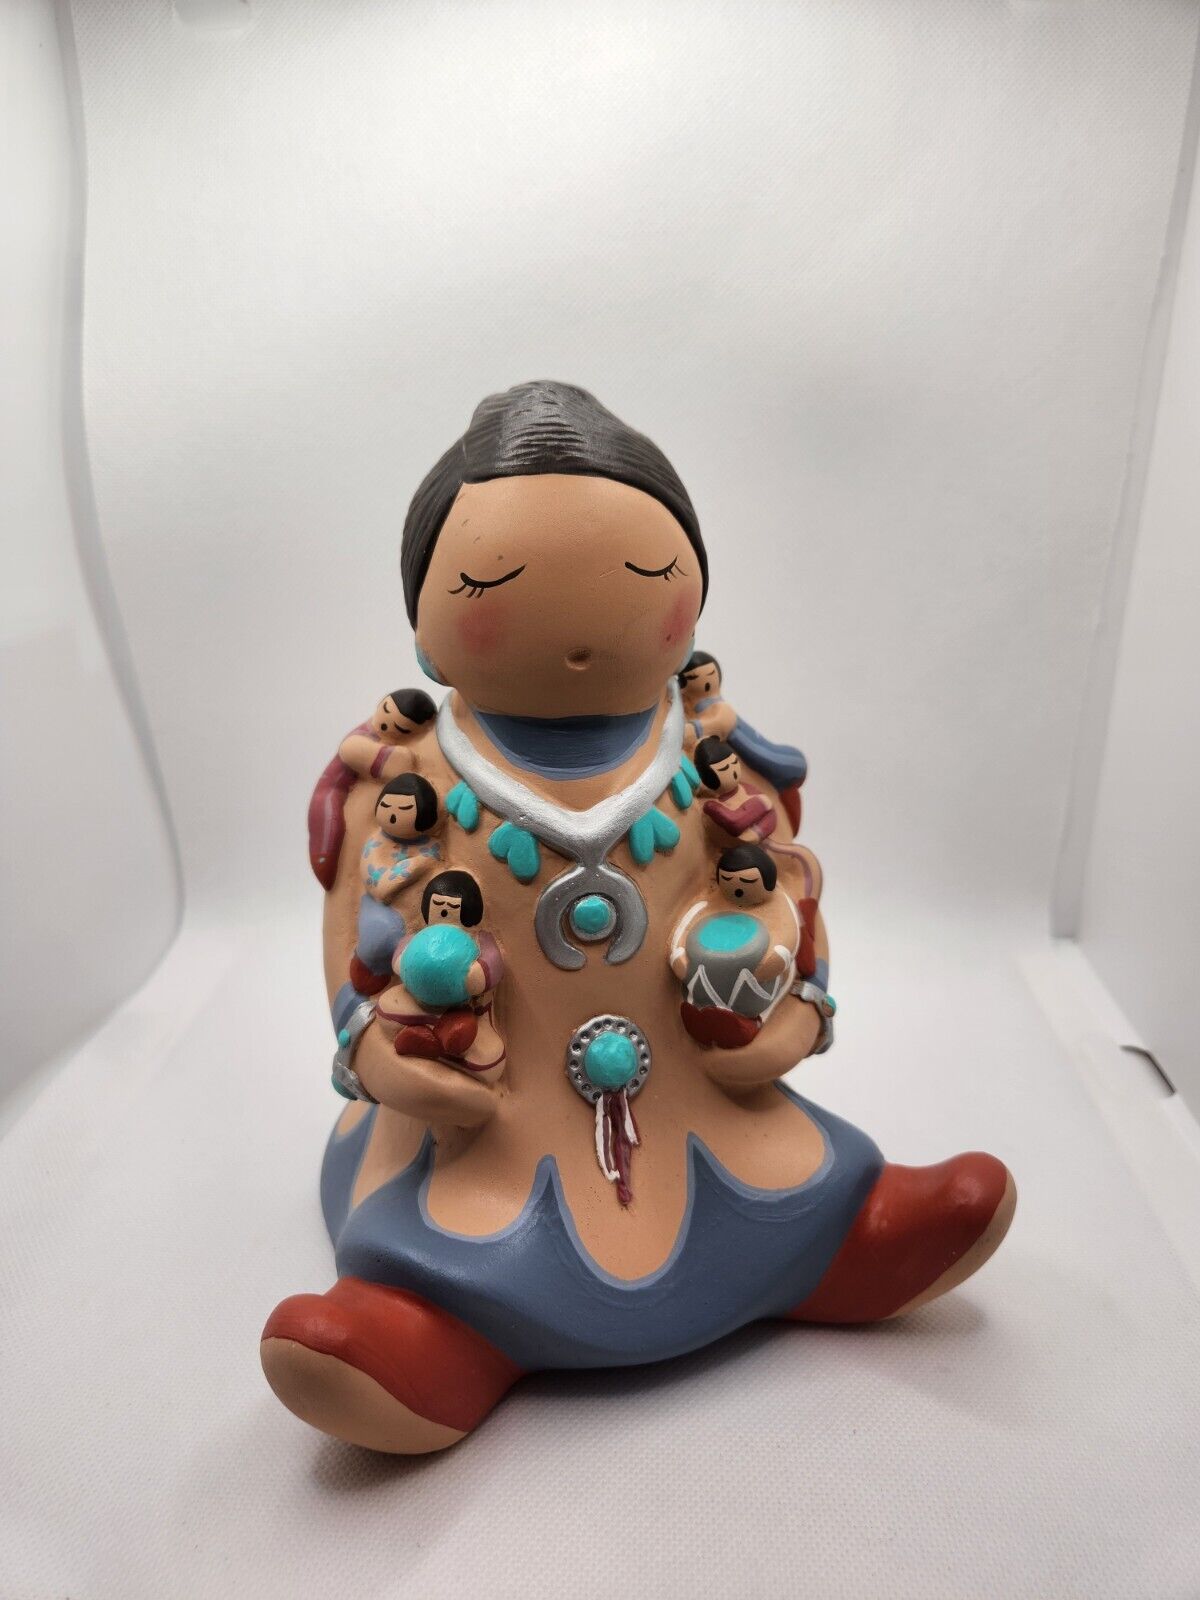 Vtg 7” Clay Native American Storyteller Figurine By Whitefeather Studios 1994 